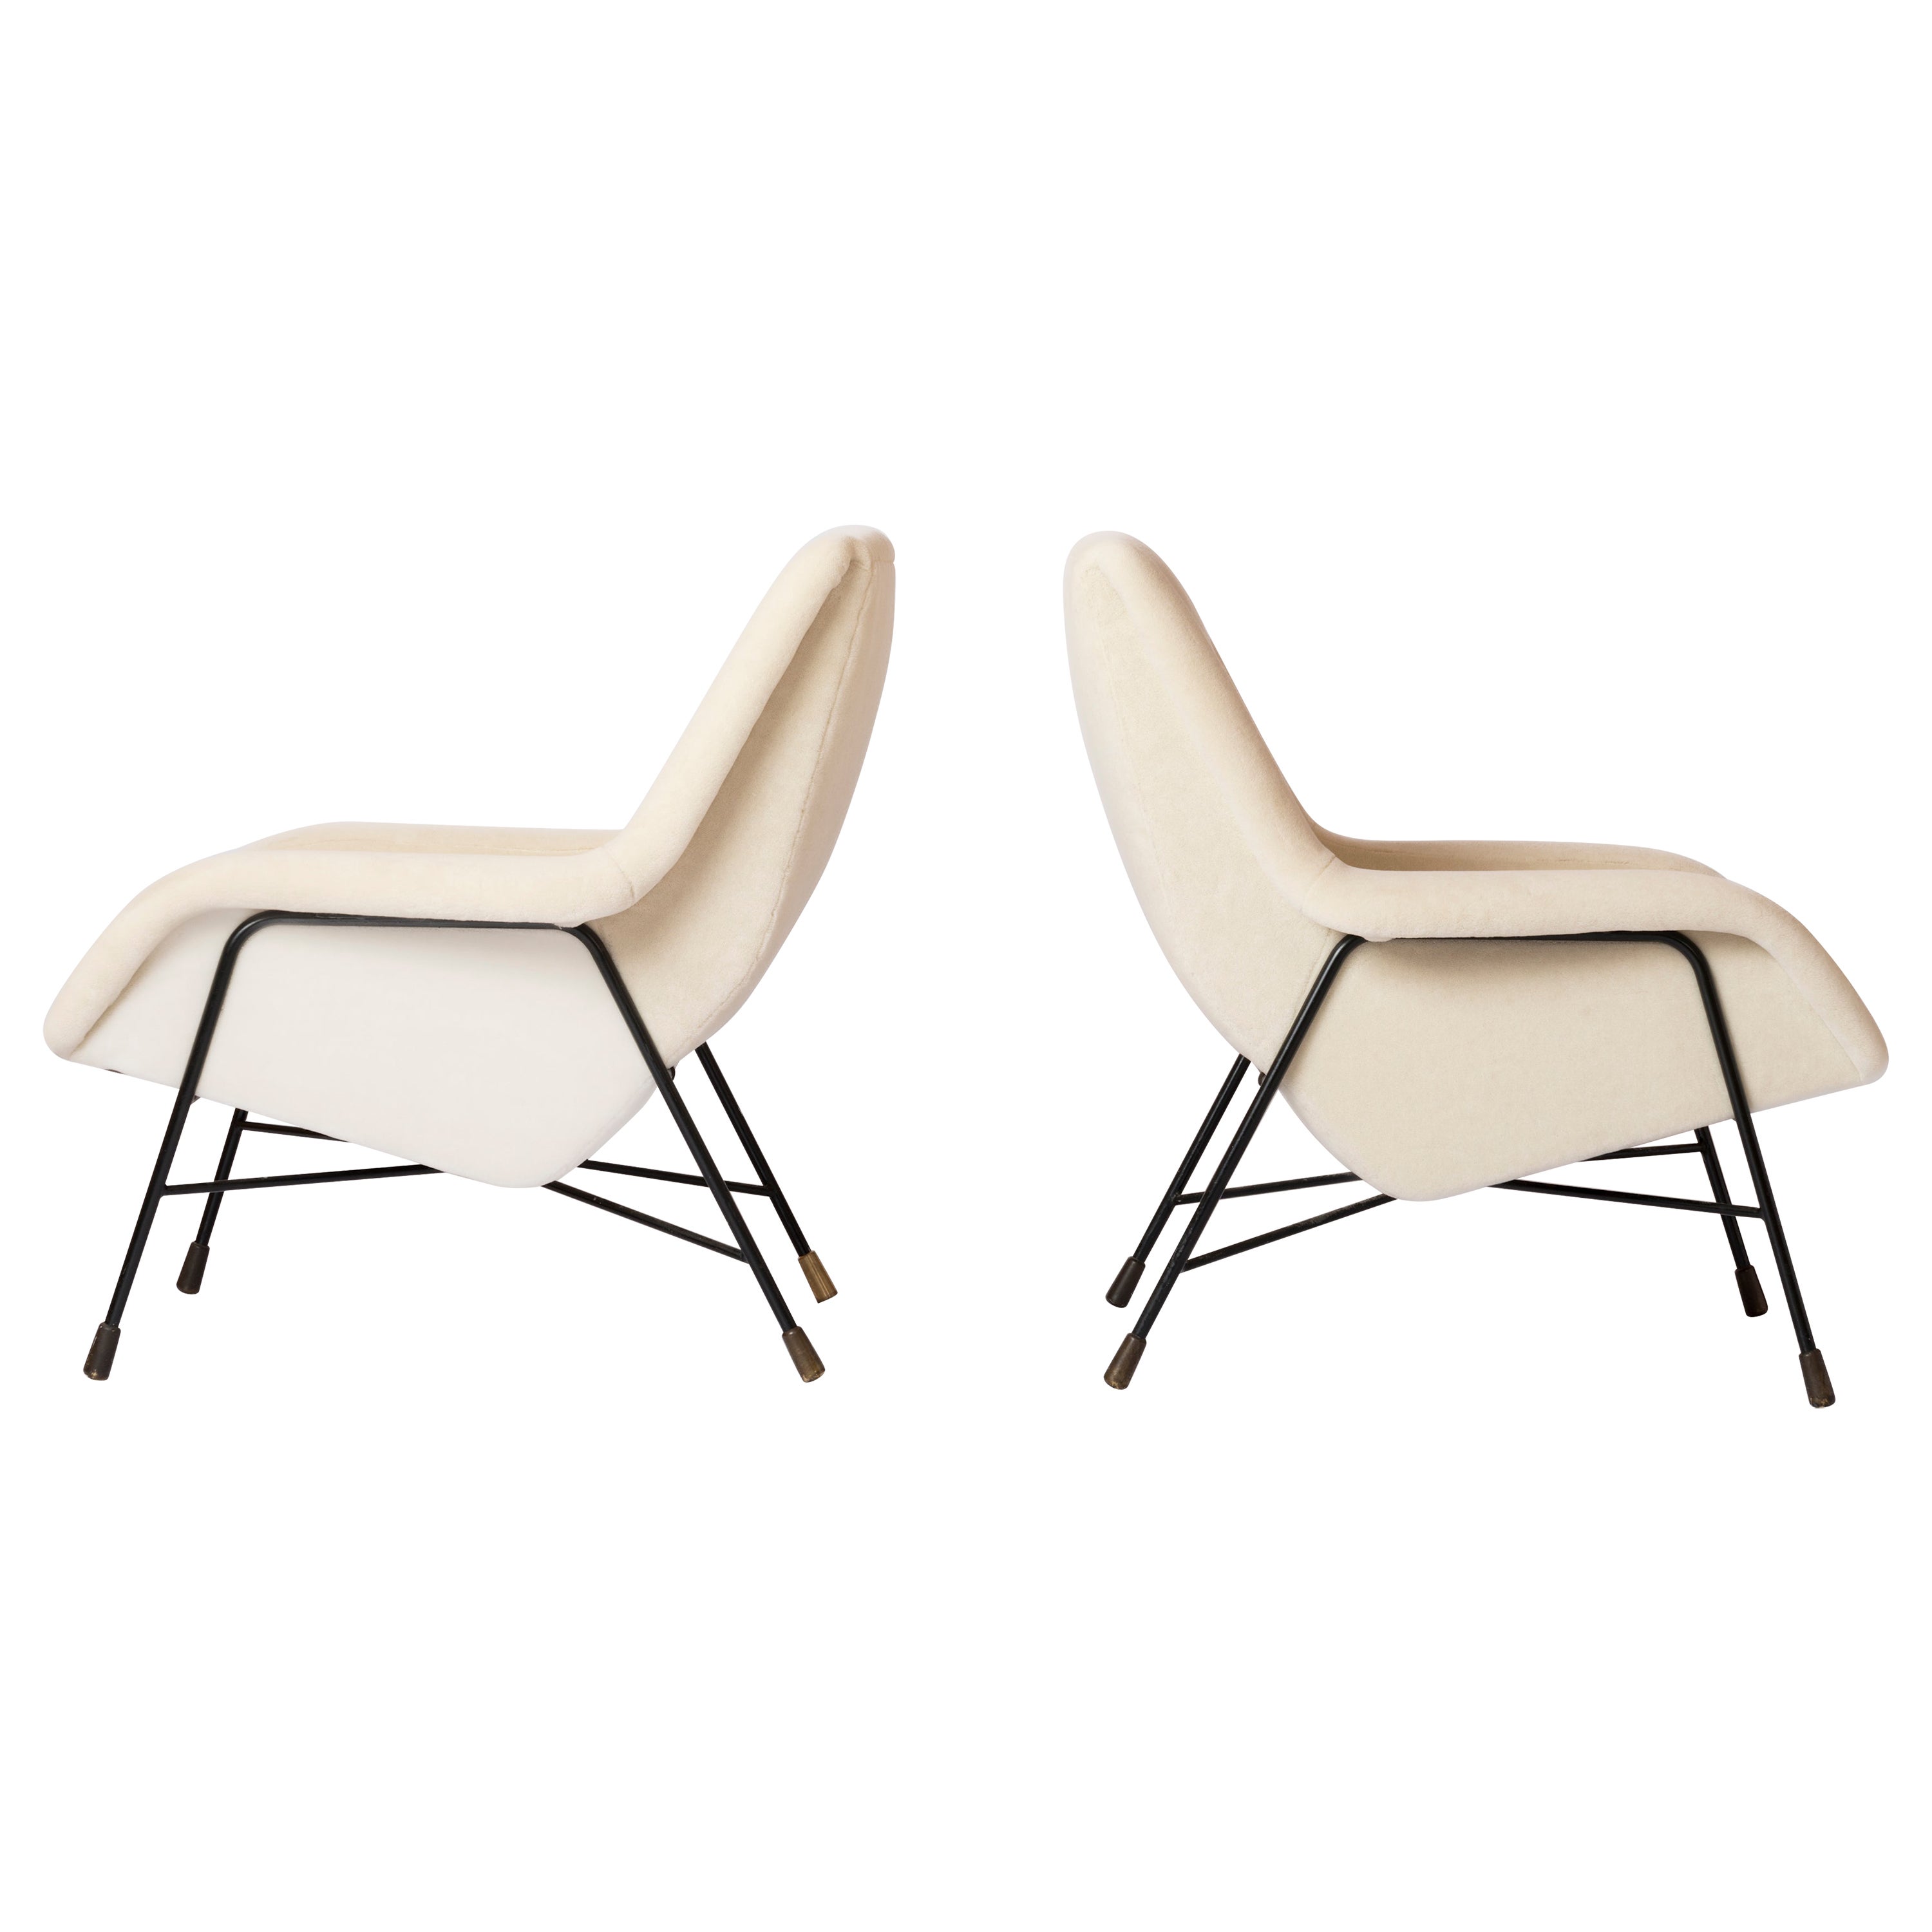 Pair of Cream Mohair Armchairs by Alfred Hendrickx for Belform - Belgium, 1958 For Sale